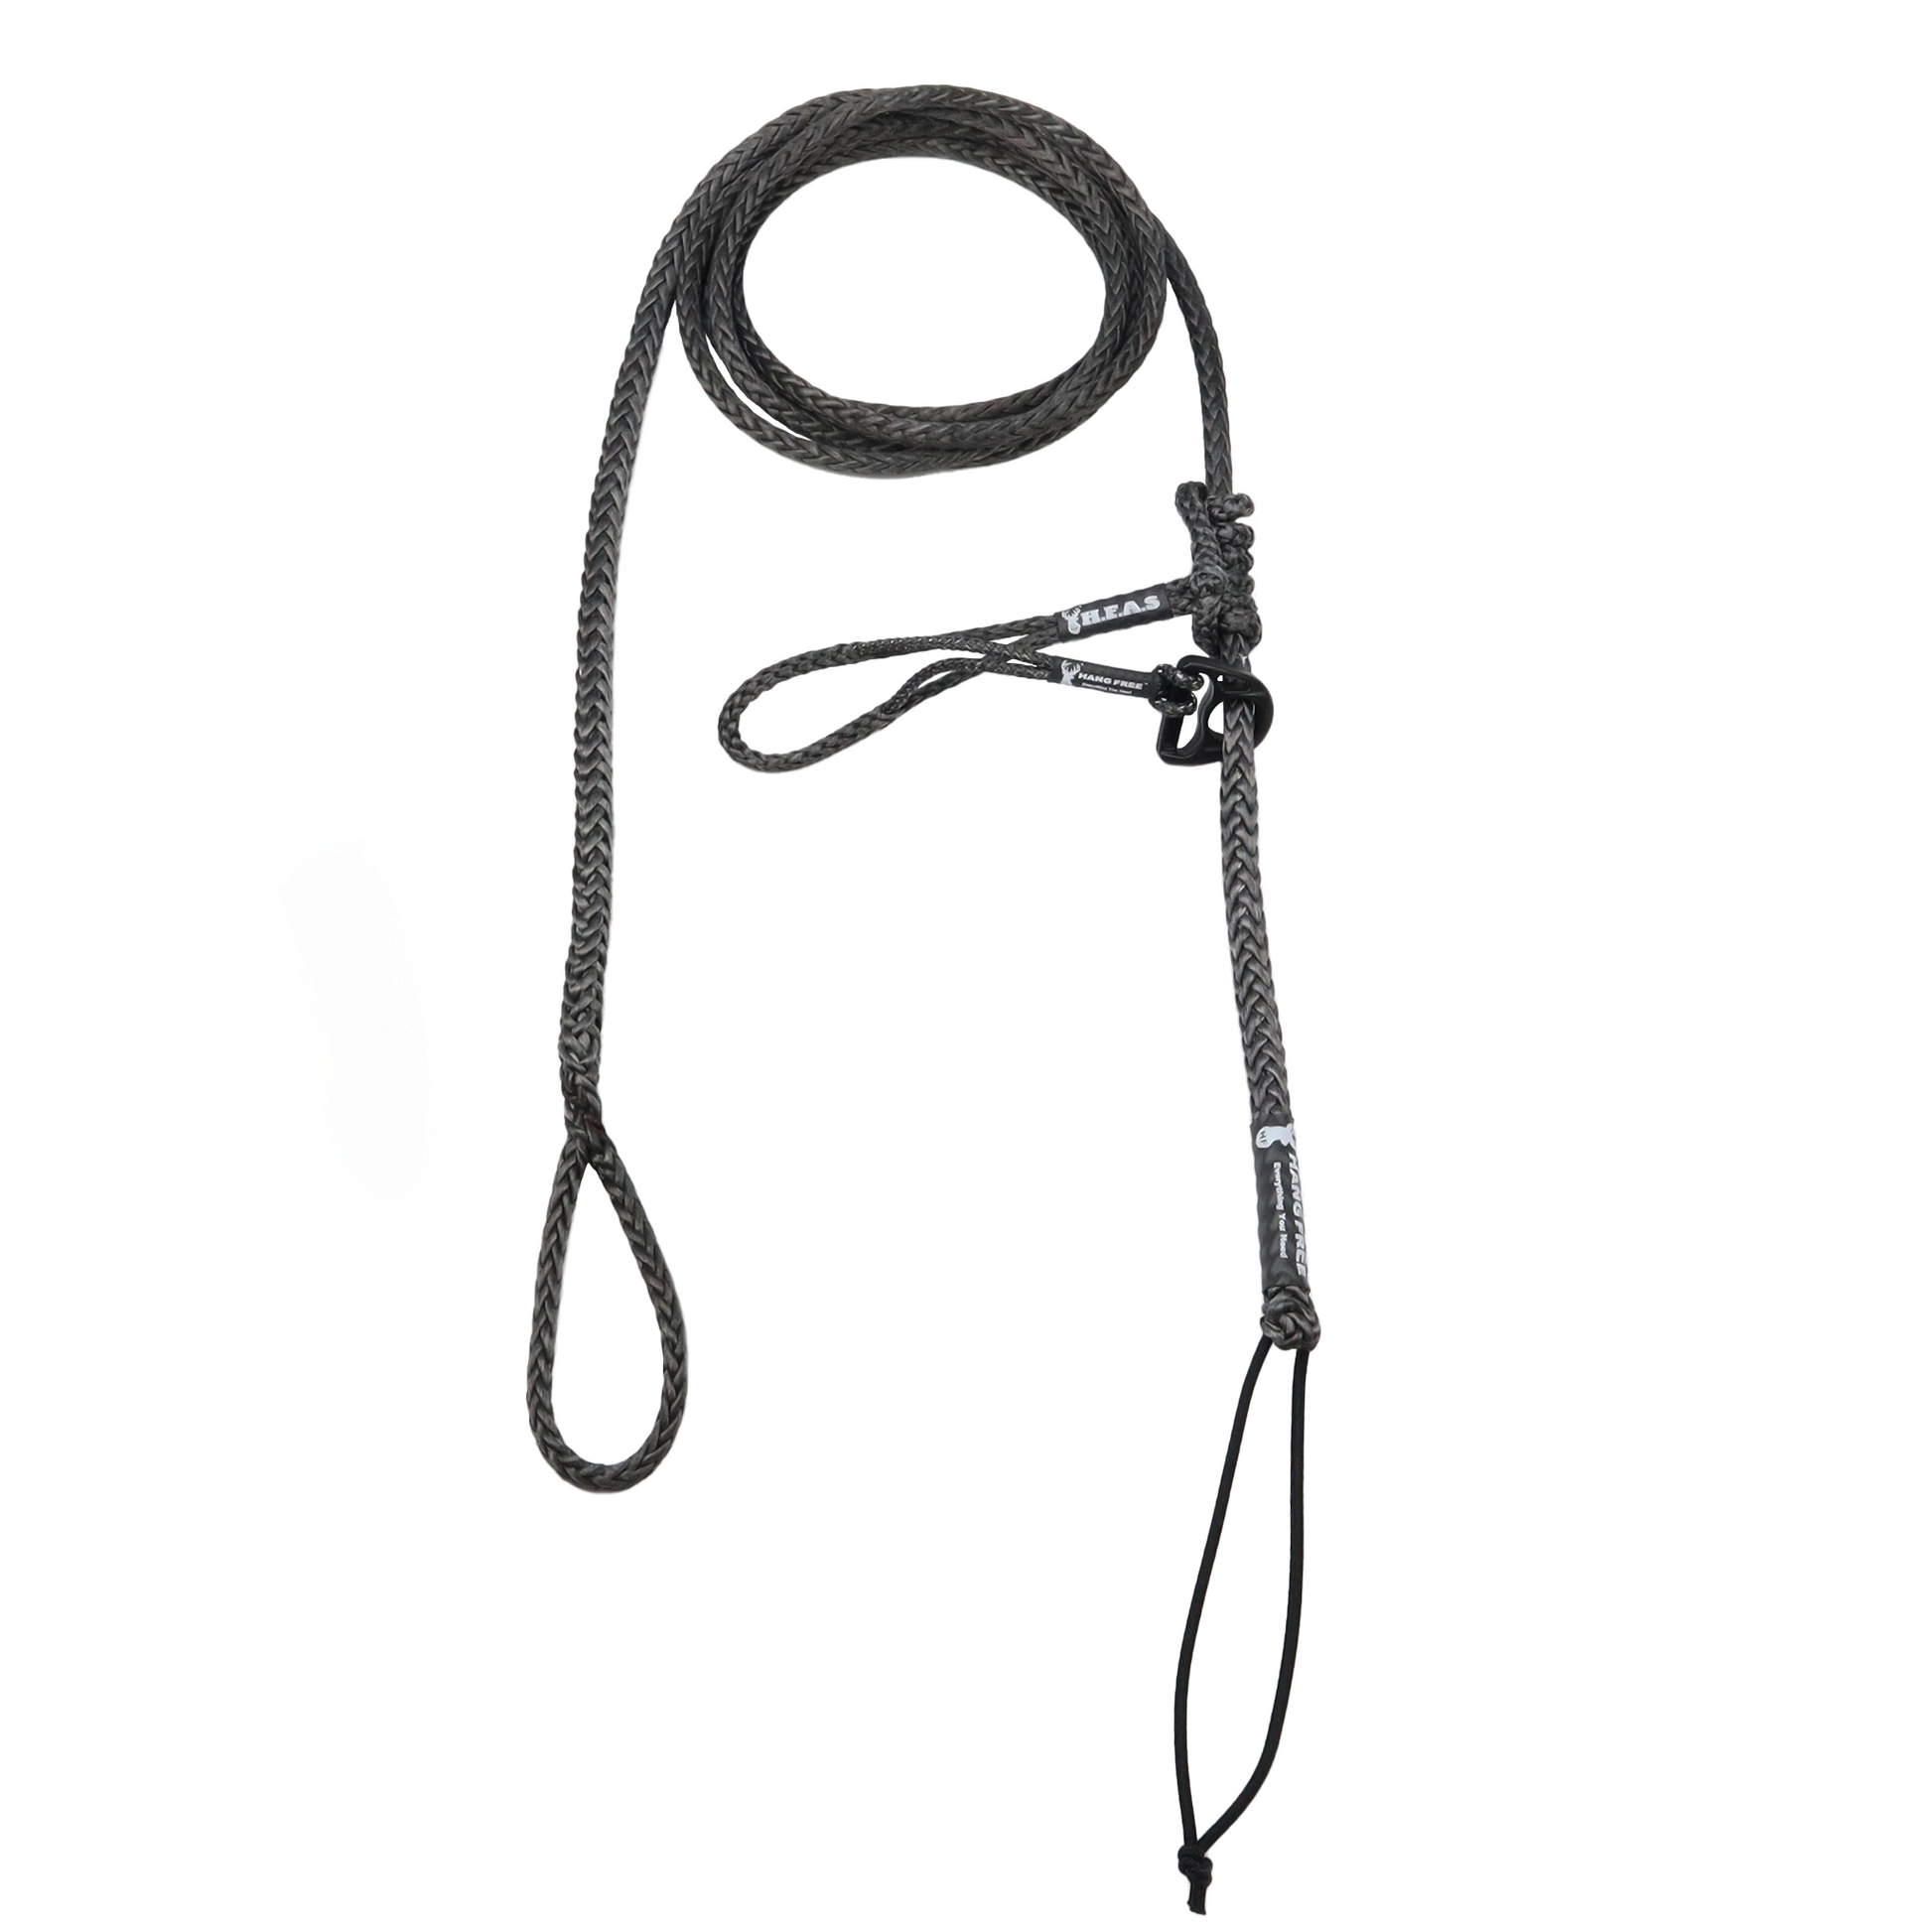 Hang Free Attachment System Lyte BlackOut